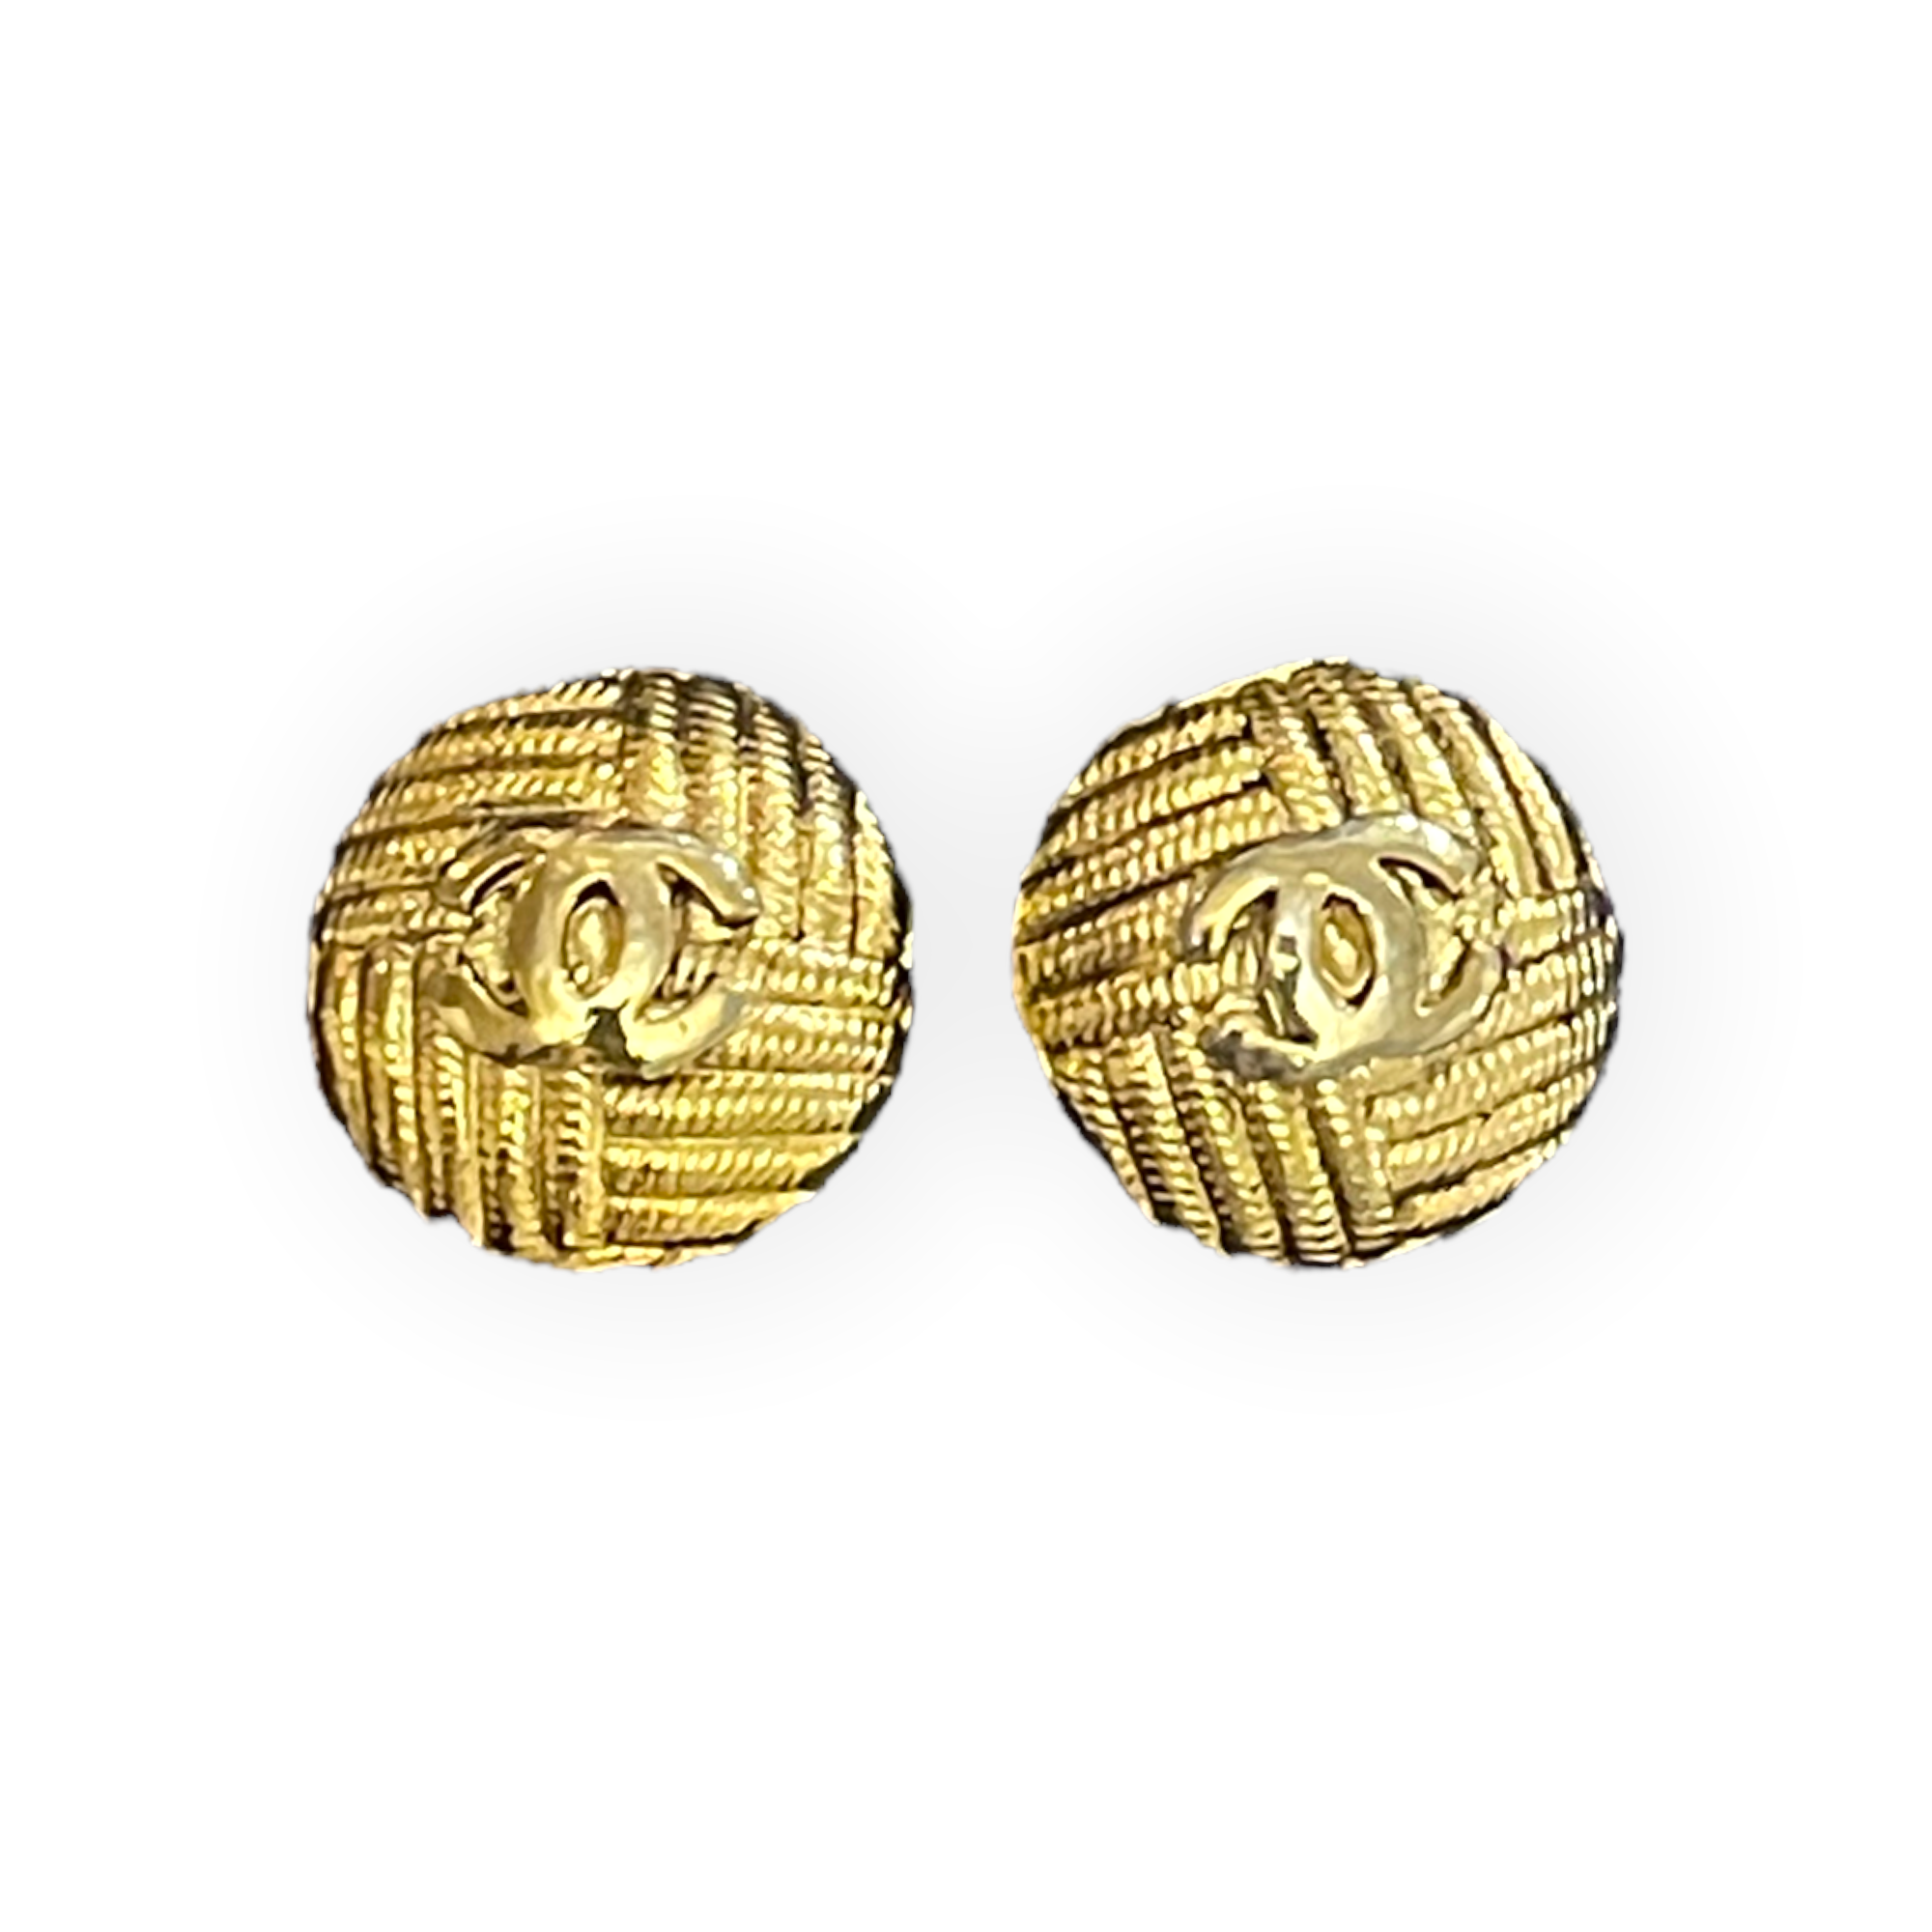 Two AUTHENTIC CHANEL Gold Tone Metal with interlocking CC logo and embossed woven design Buttons